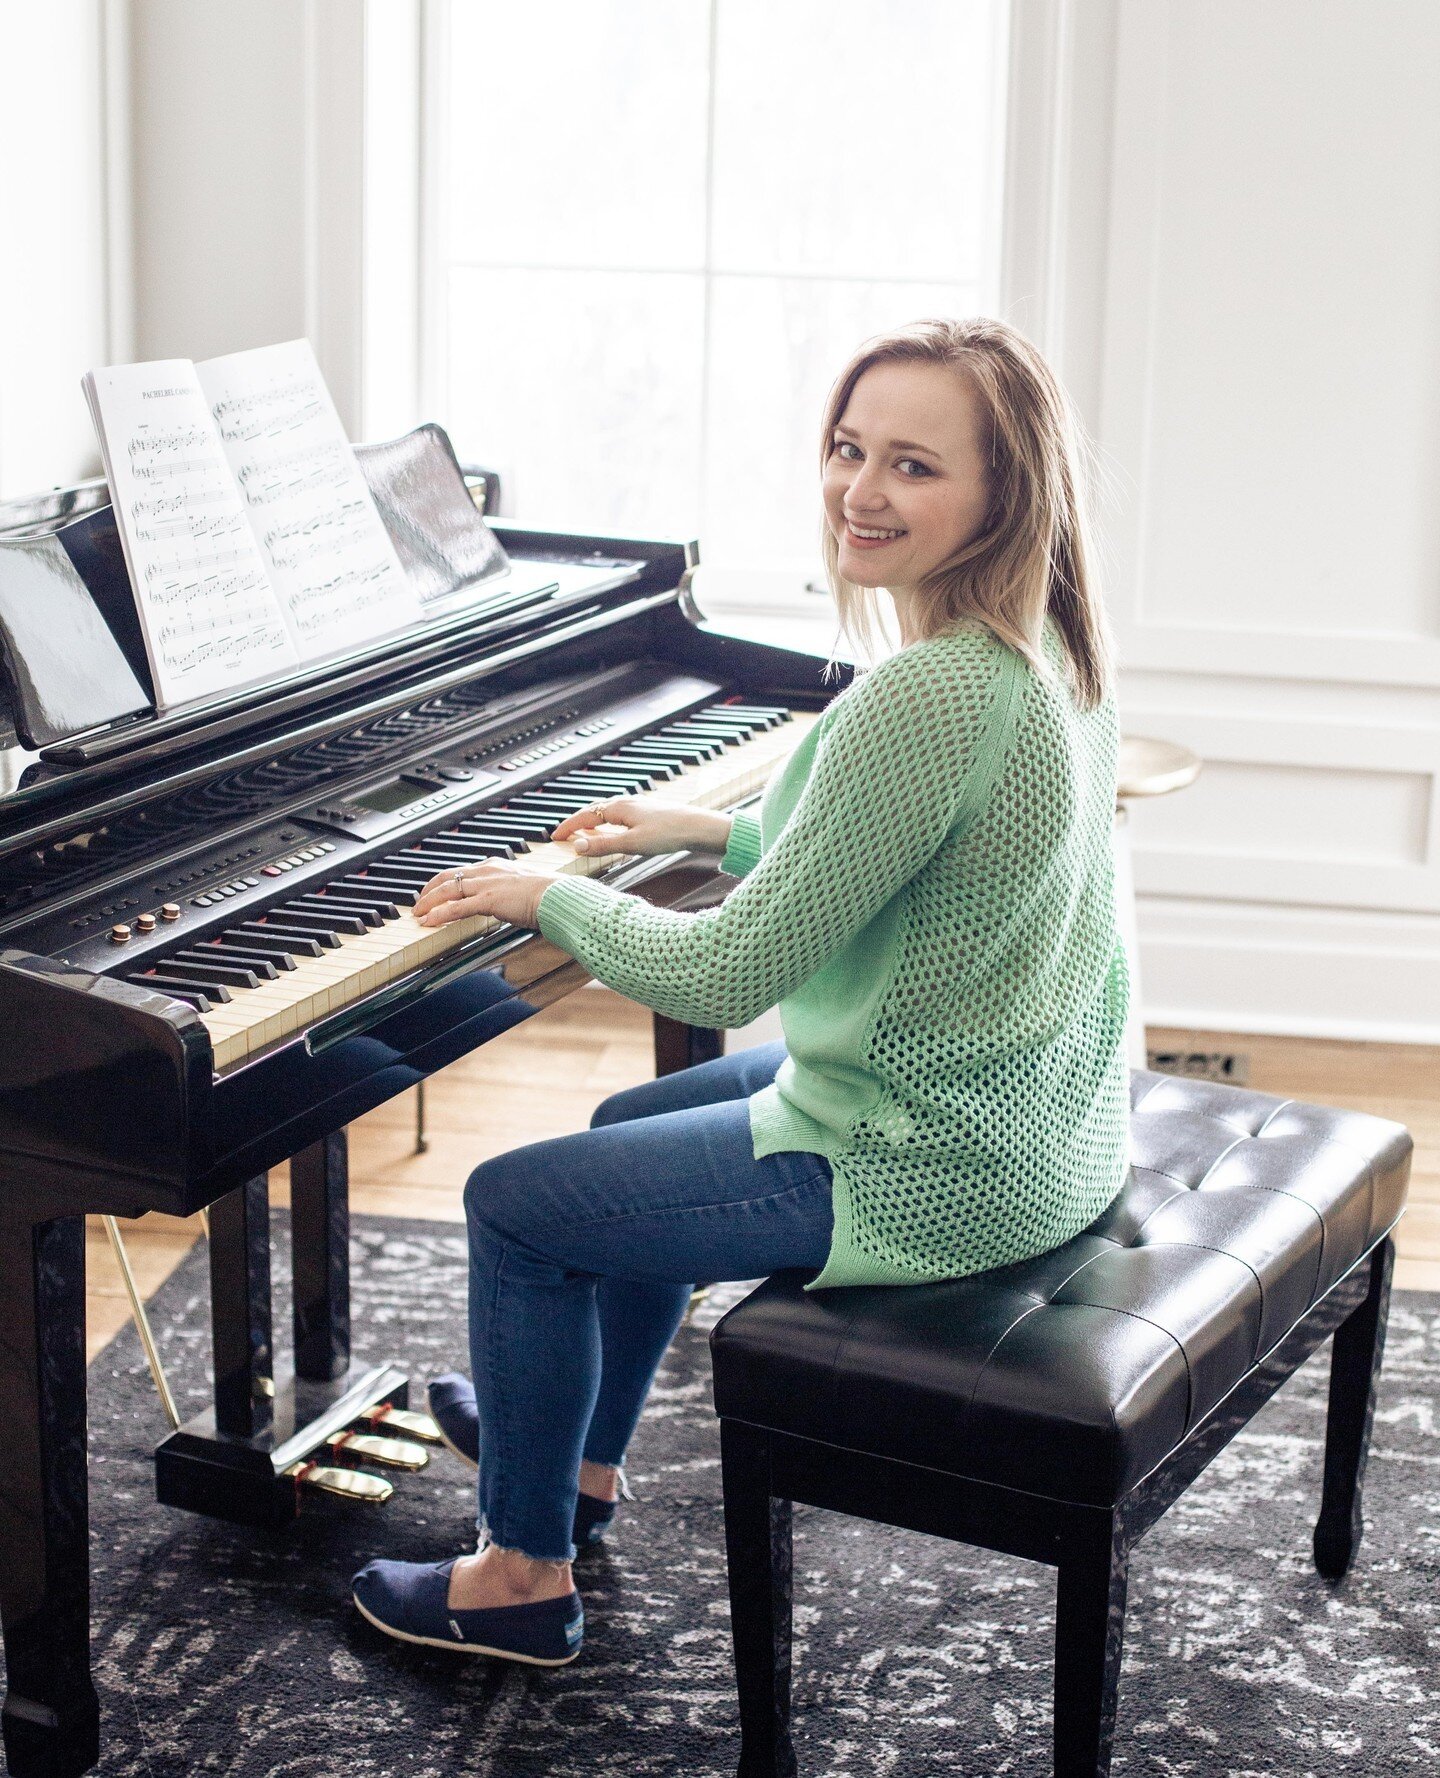 Summer is quickly approaching - which means it&rsquo;s time to start thinking about what fun activities your family will be doing!⁠
⁠
With school out, many parents &amp; children find the summer months to be a wonderful time for piano lessons. There&